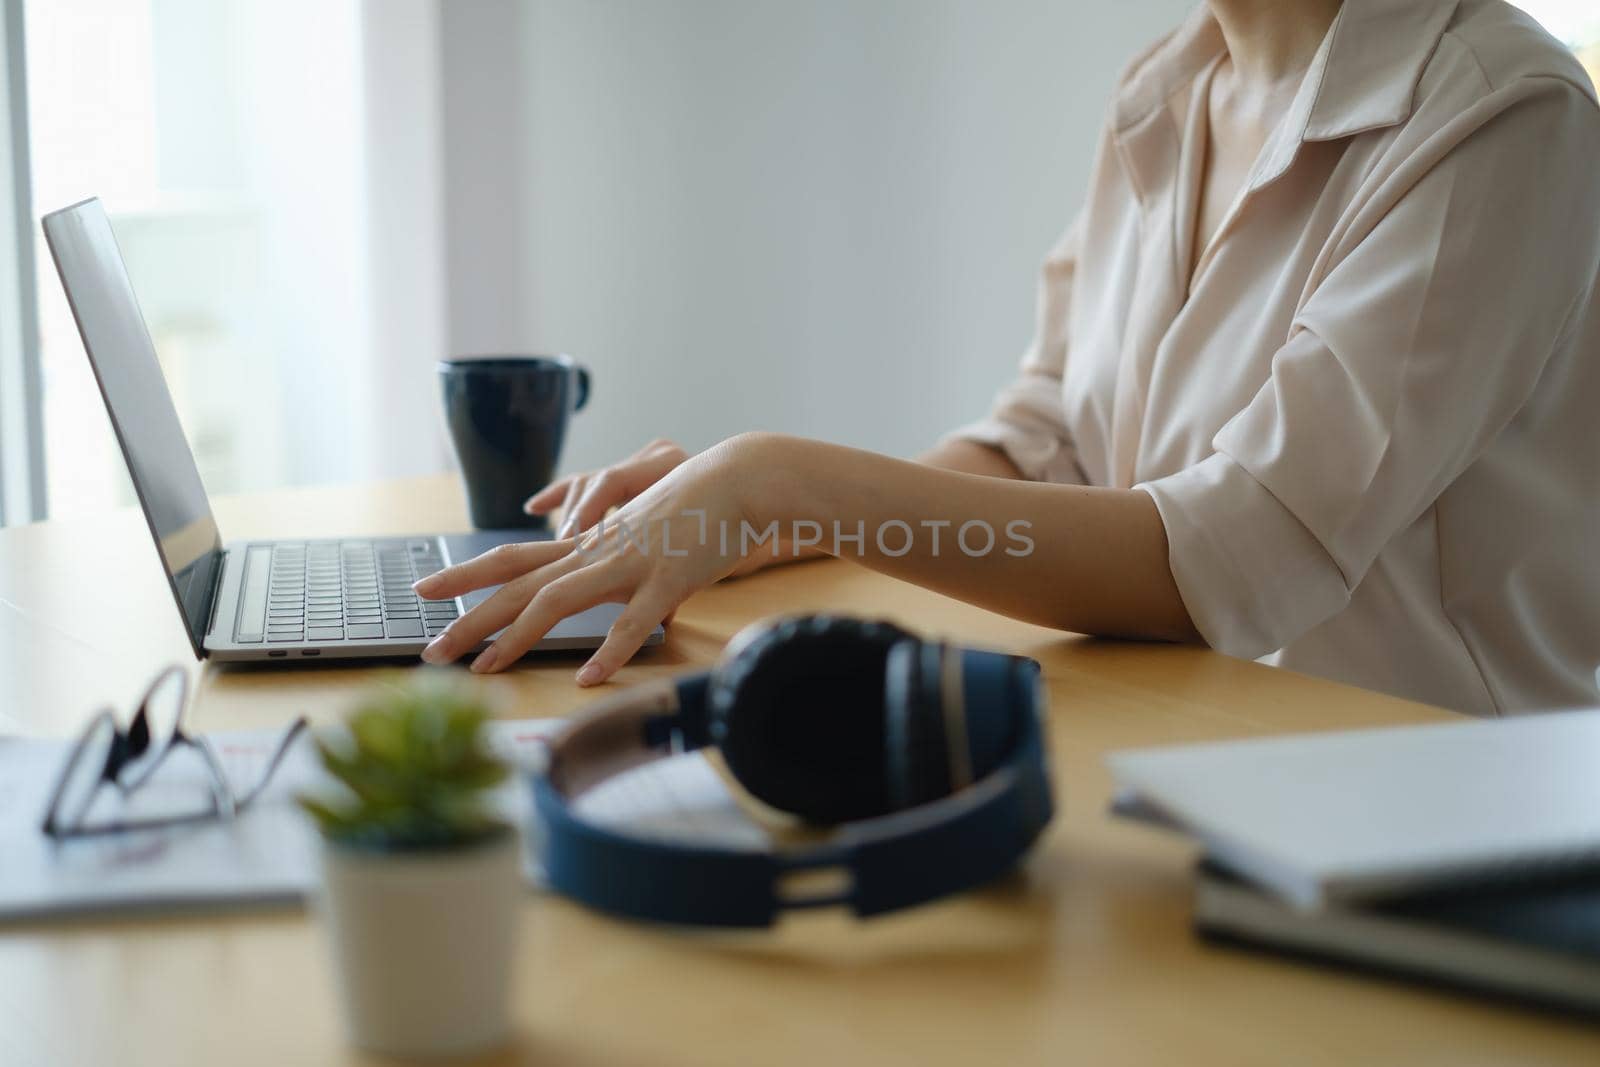 Video conference, Online meeting video call, close up of business woman looking at laptop computer screen working or watching webinar on laptop in home office. work from home concept. by itchaznong